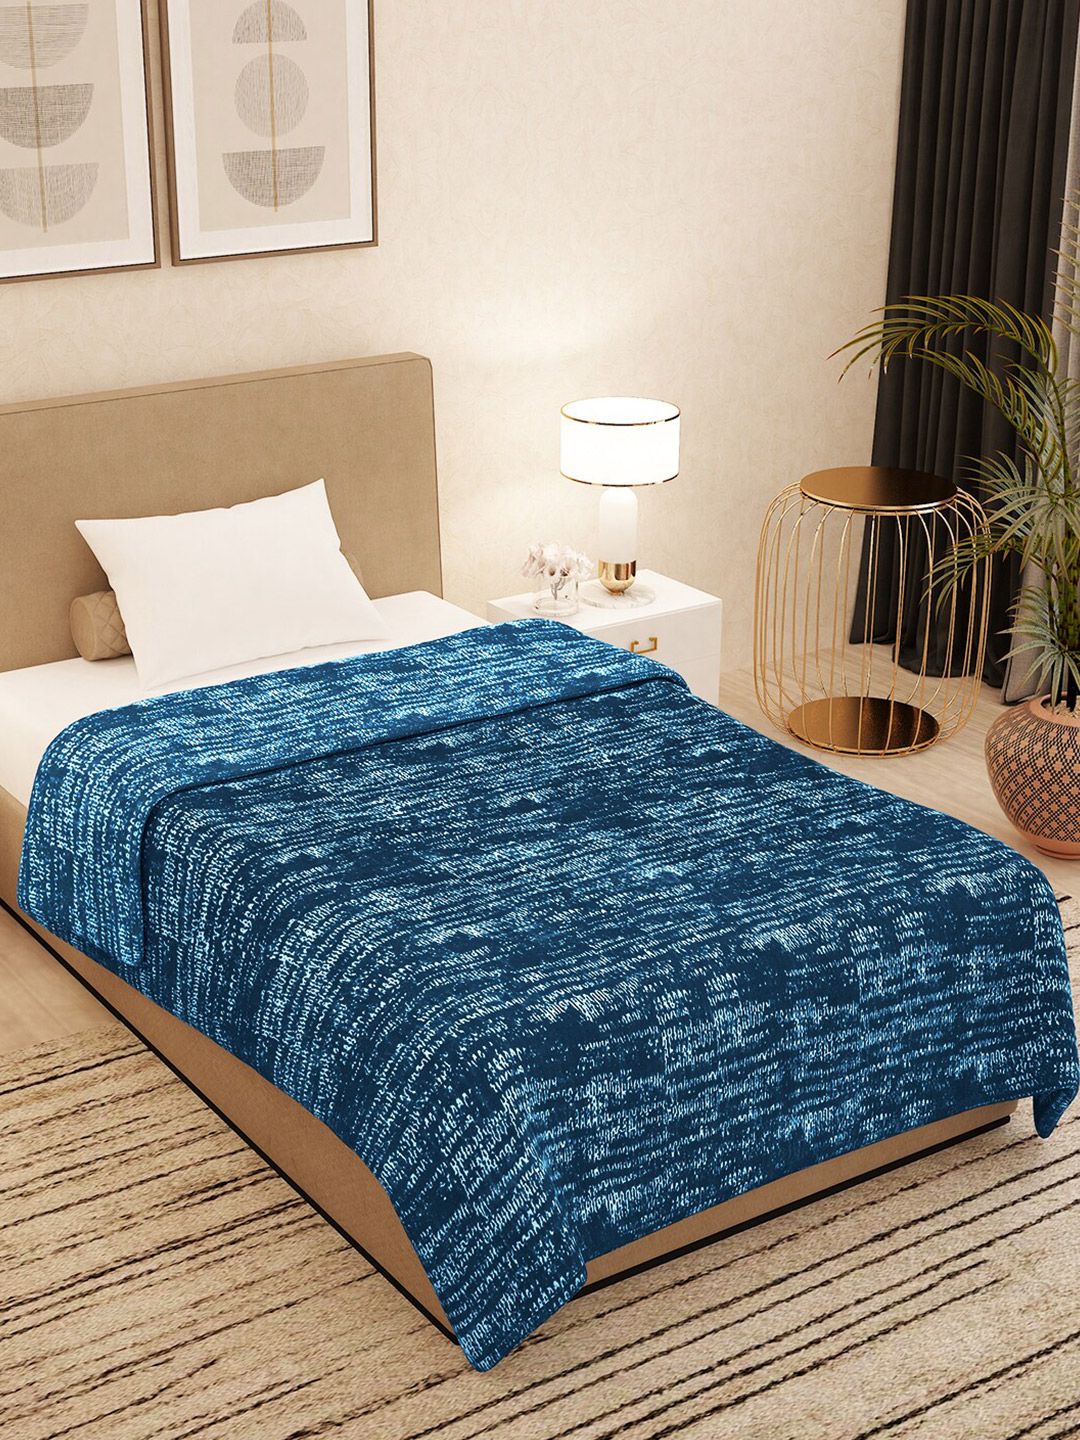 Story@home Blue Ethnic Motifs Heavy Winter 500 GSM Single Bed Blanket Price in India